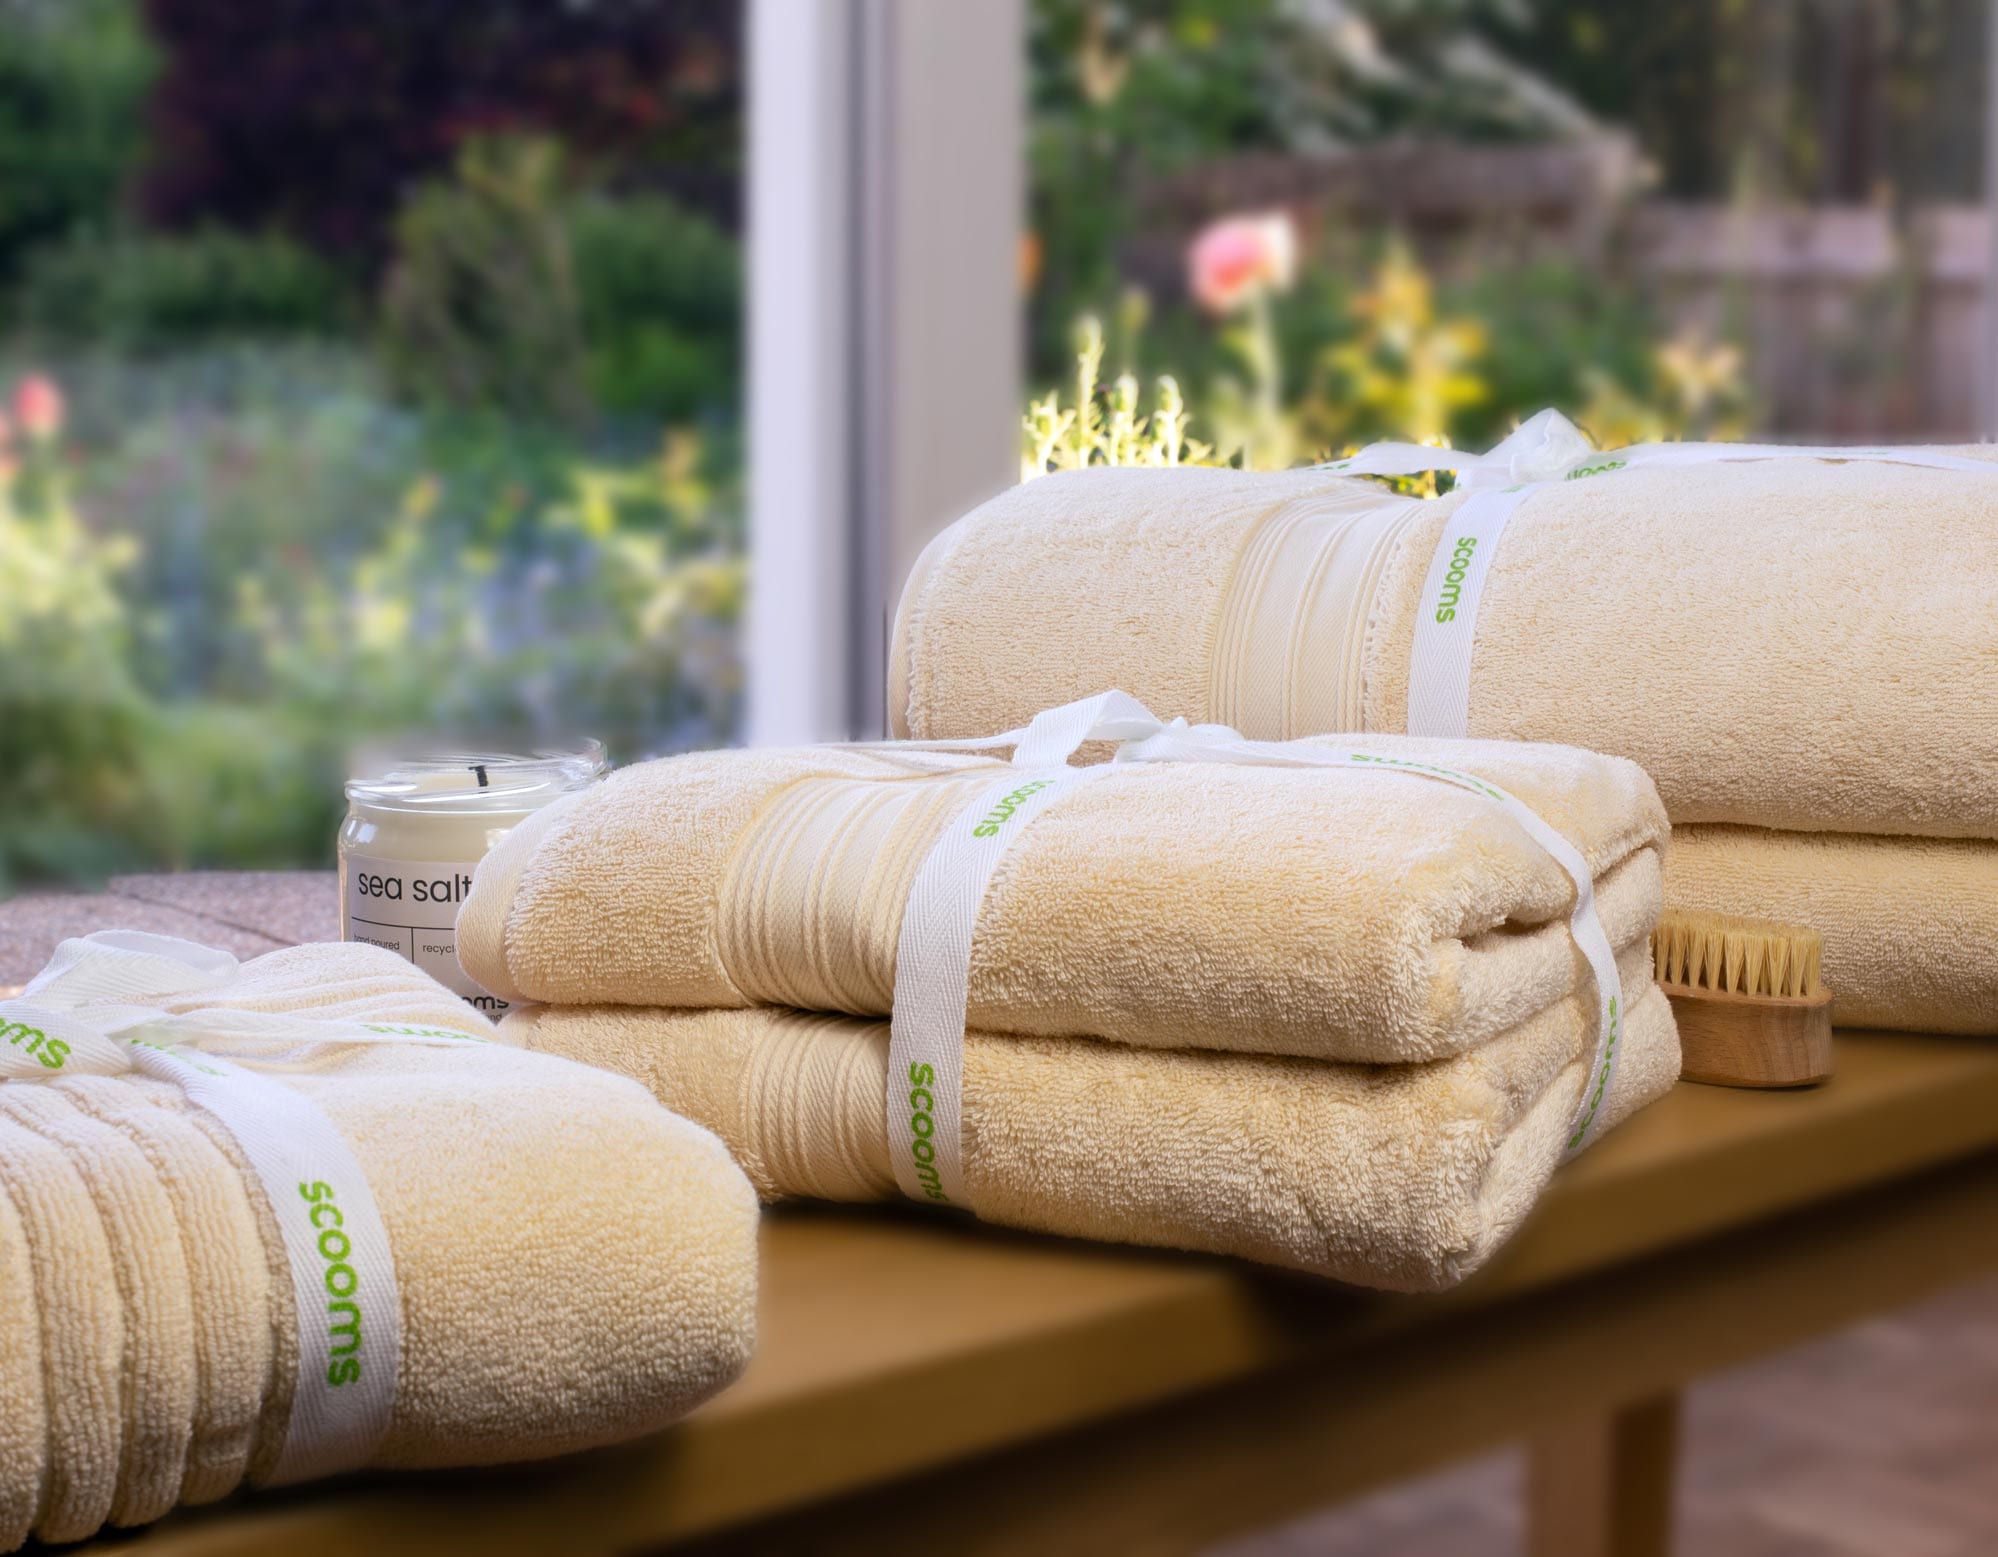 Egyptian Cotton Creme Towel Bales Tied With Scooms Ribbon On Wooden Bench In Front Of Window